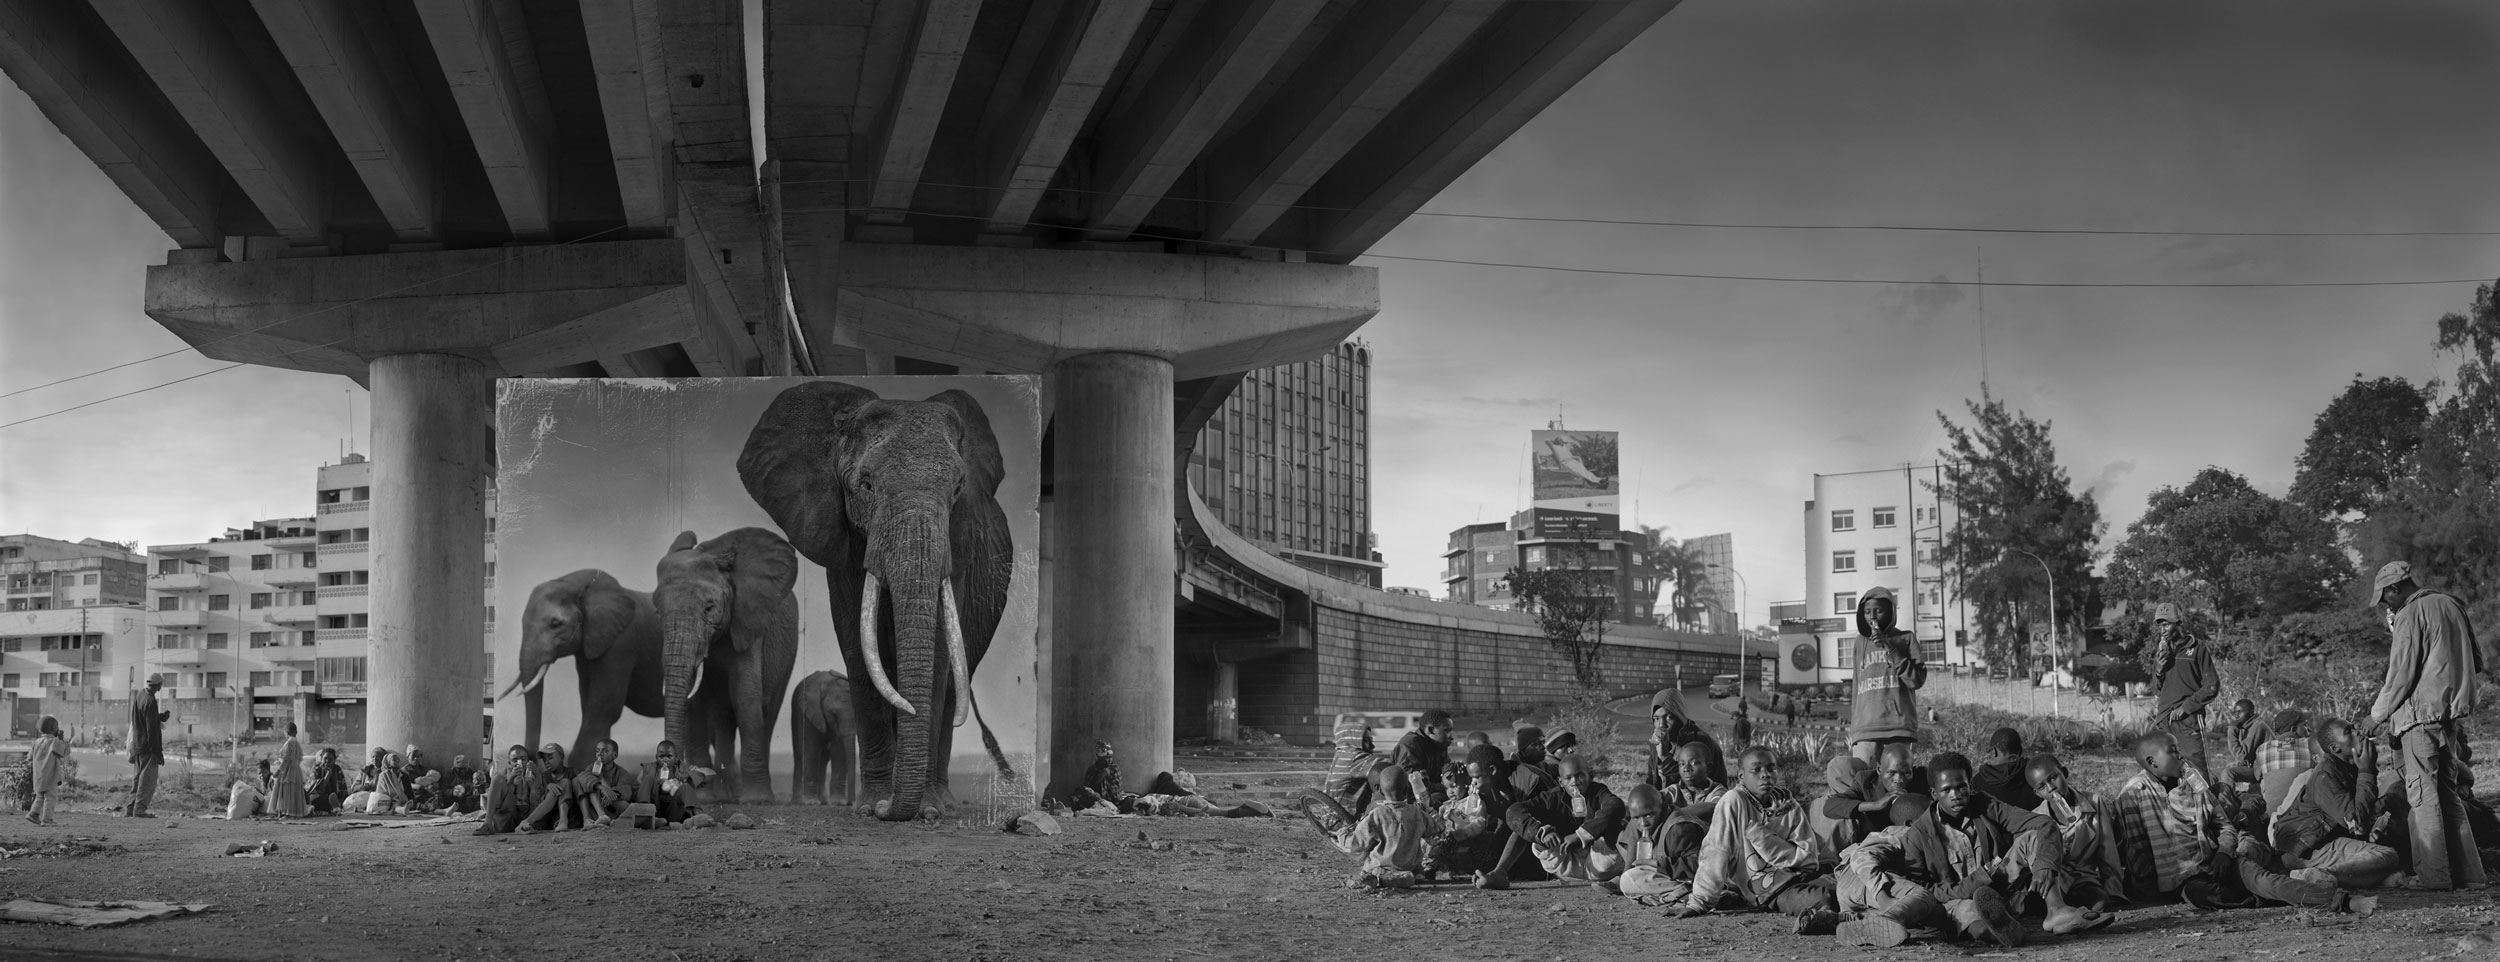 UNDERPASS-WITH-ELEPHANTS-and-GLUE-SNIFFING-CHILDREN